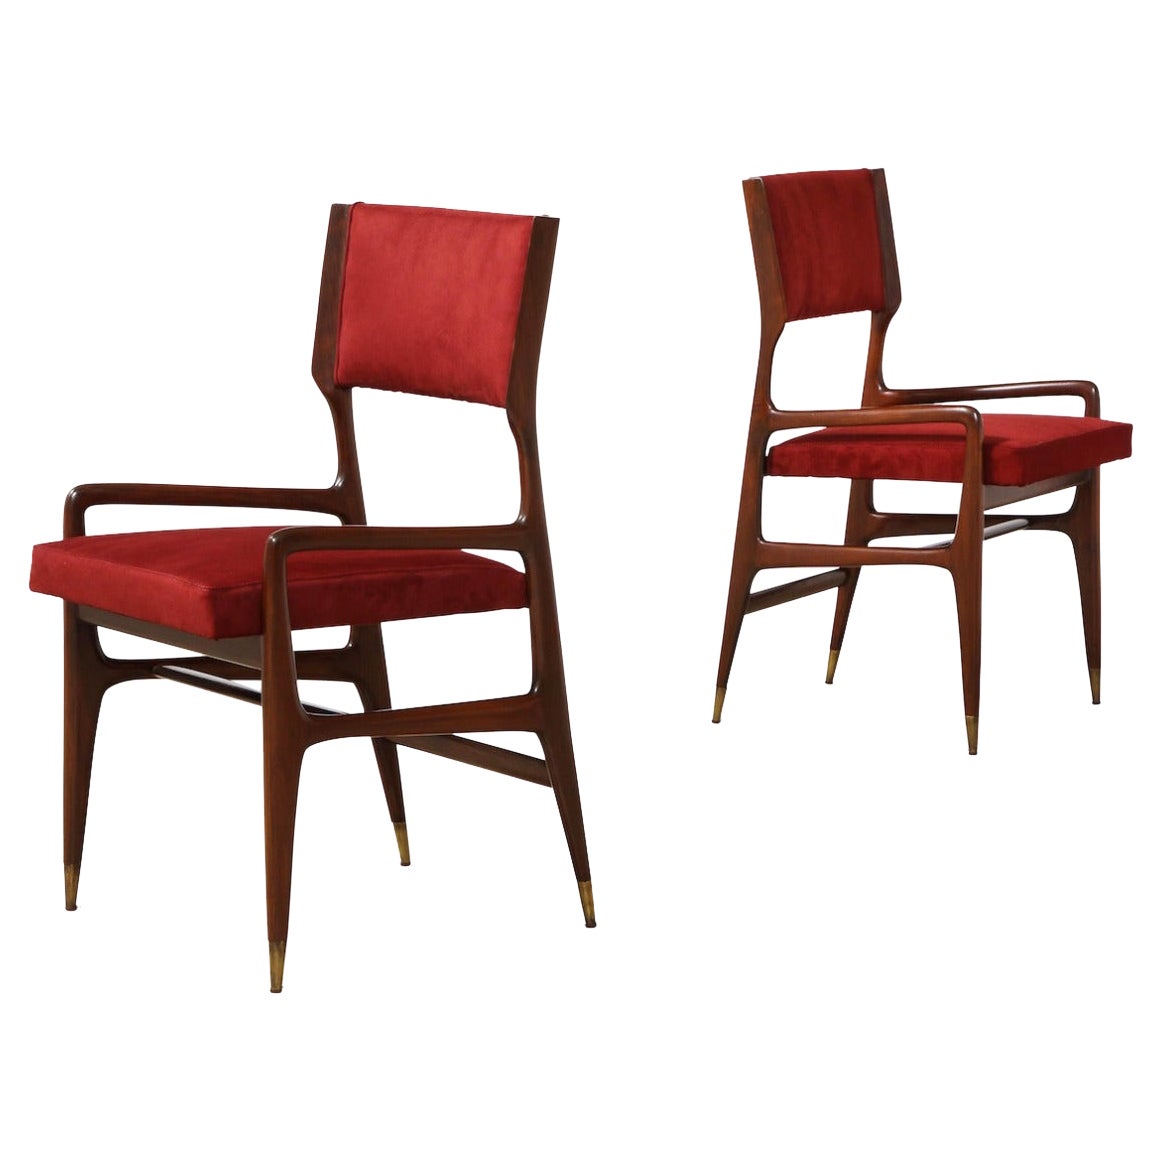  Model #676 Dining Chairs by Gio Ponti for Cassina For Sale